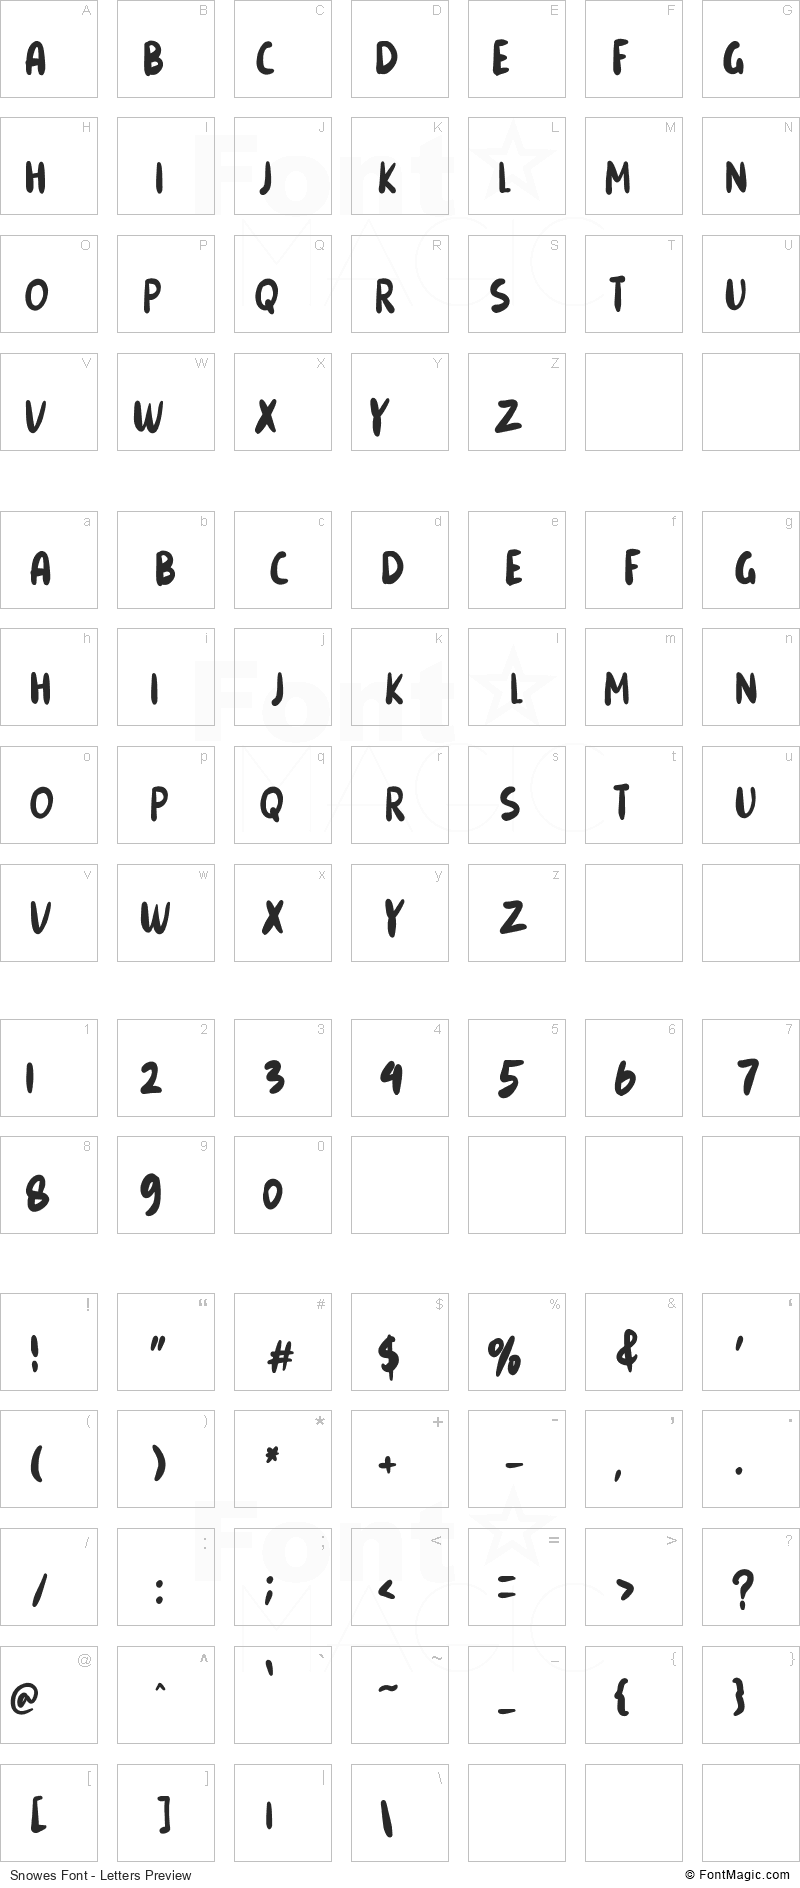 Snowes Font - All Latters Preview Chart